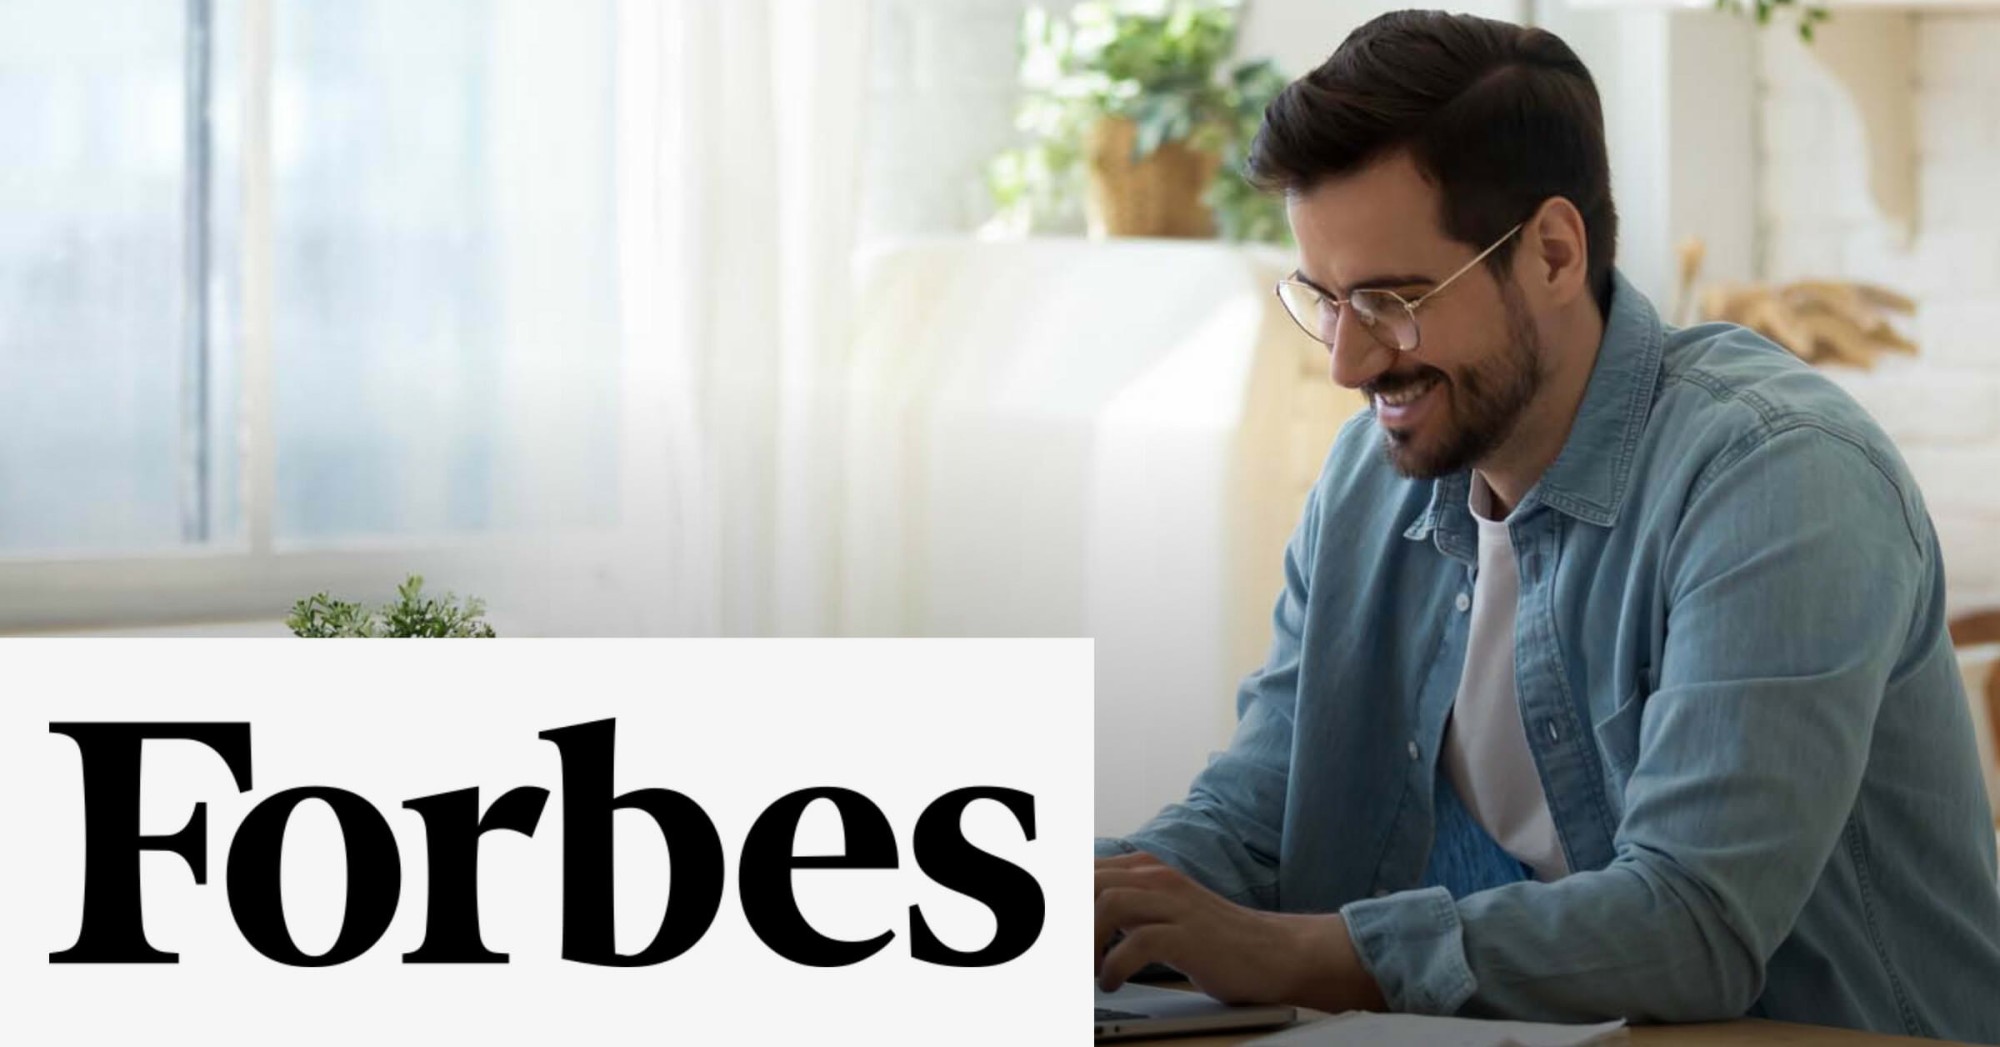 Photo of a man working at his laptop with the Forbes logo overlayed